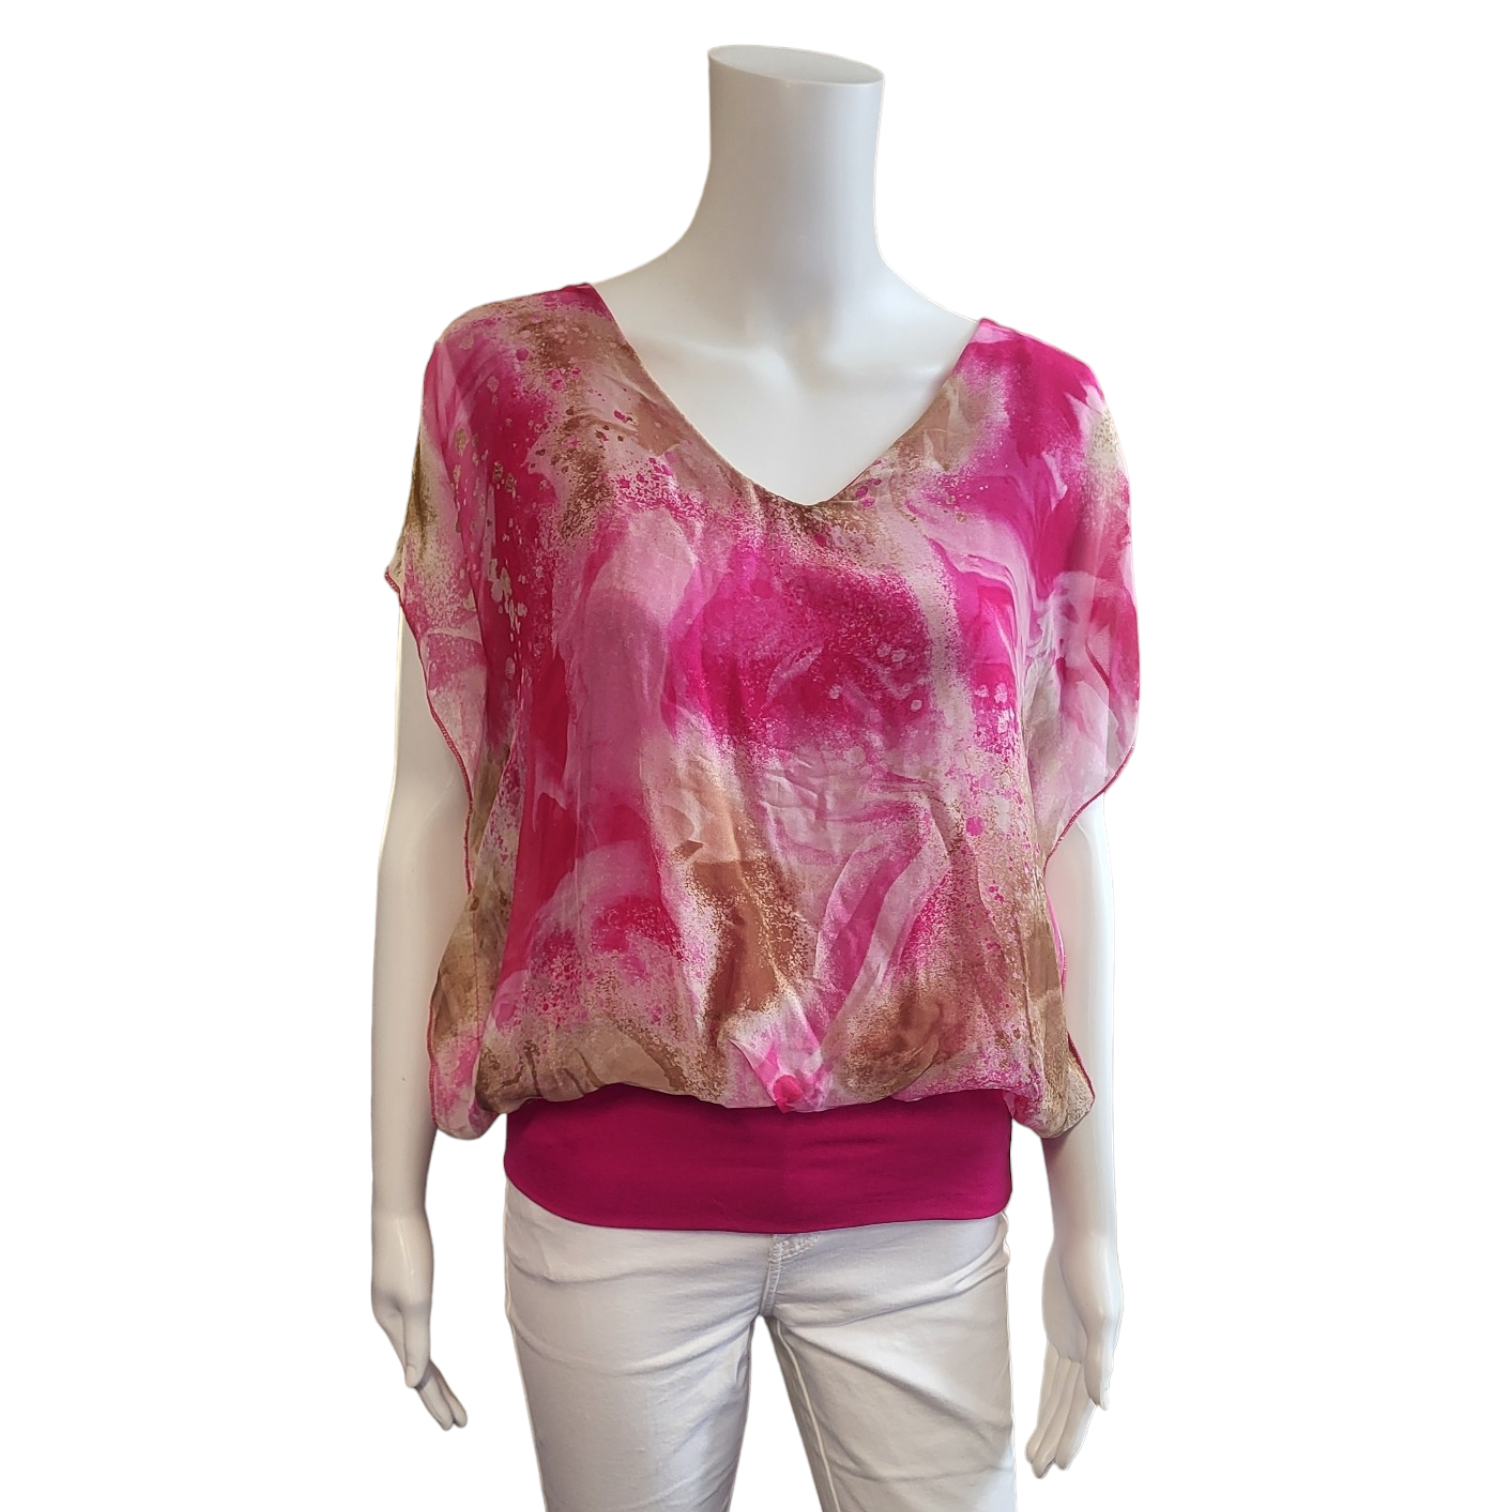 pink and beigs silky top wiht v neck and stretchy vest that shows beneath the blouse